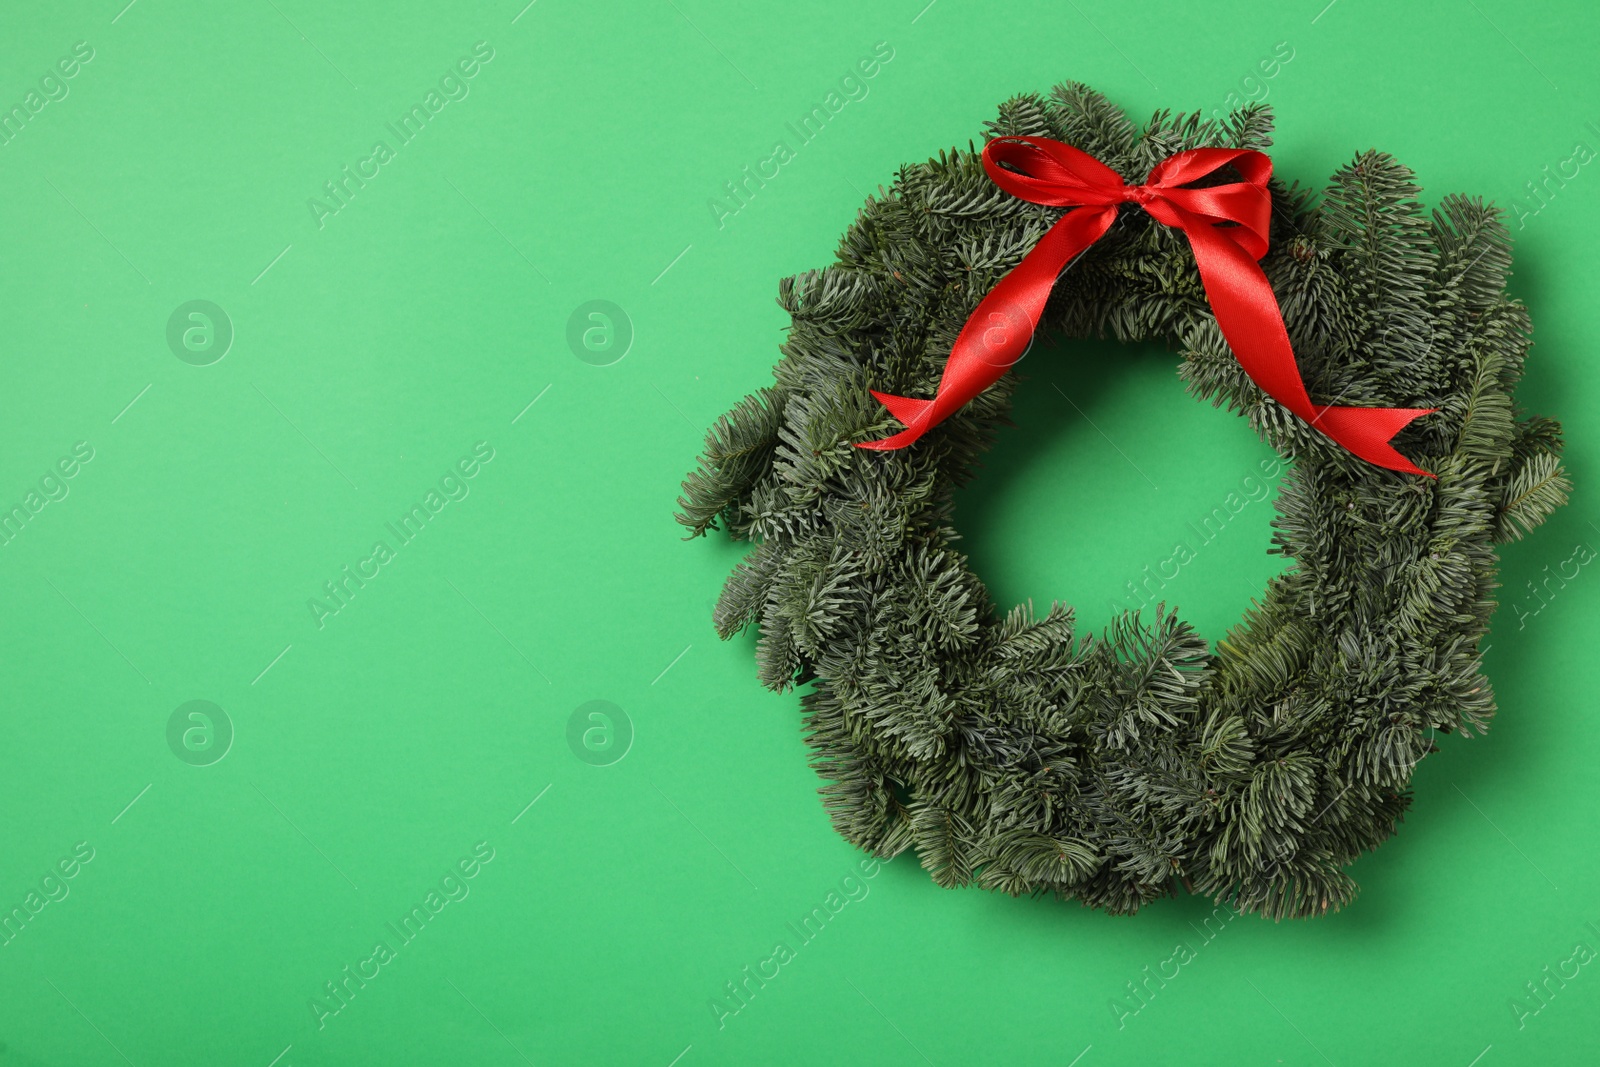 Photo of Christmas wreath made of fir tree branches with red ribbon on green background, space for text